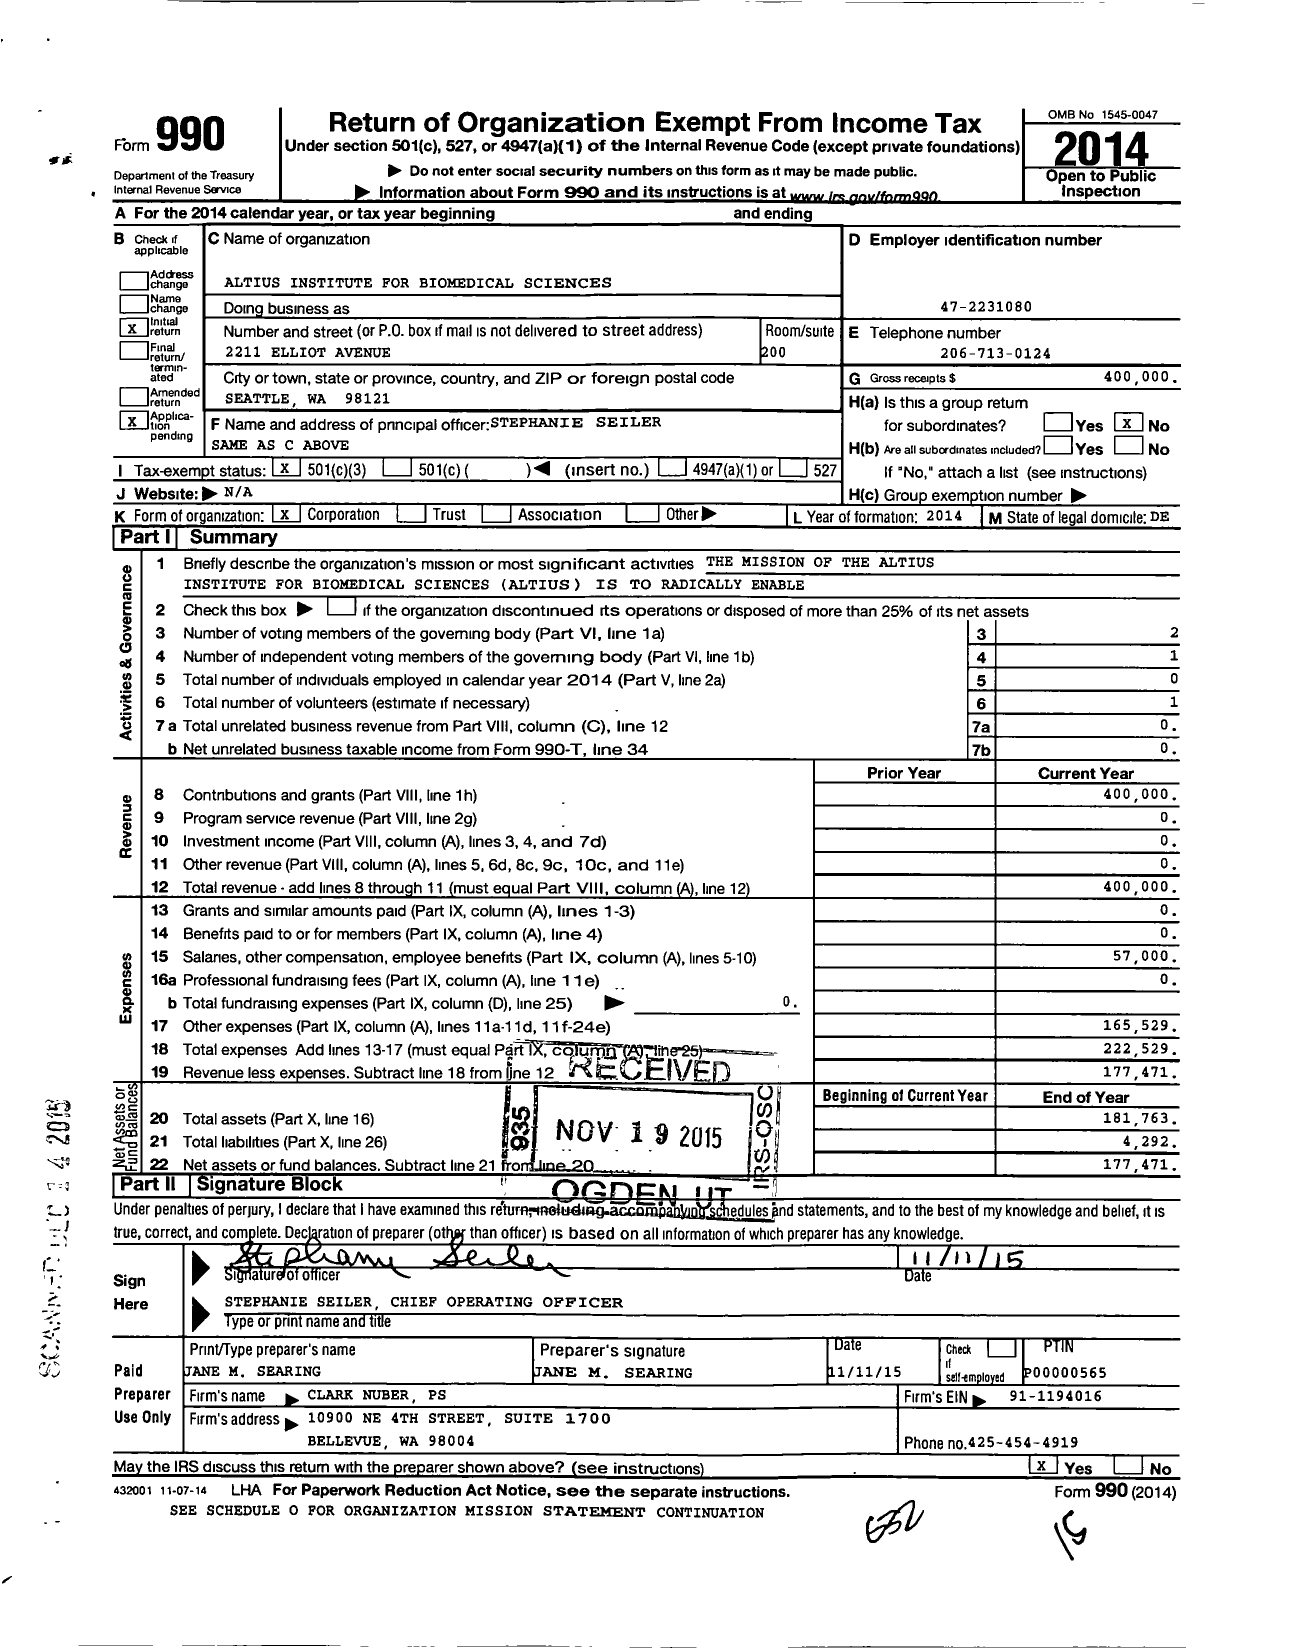 Image of first page of 2014 Form 990 for Altius Institute for Biomedical Sciences